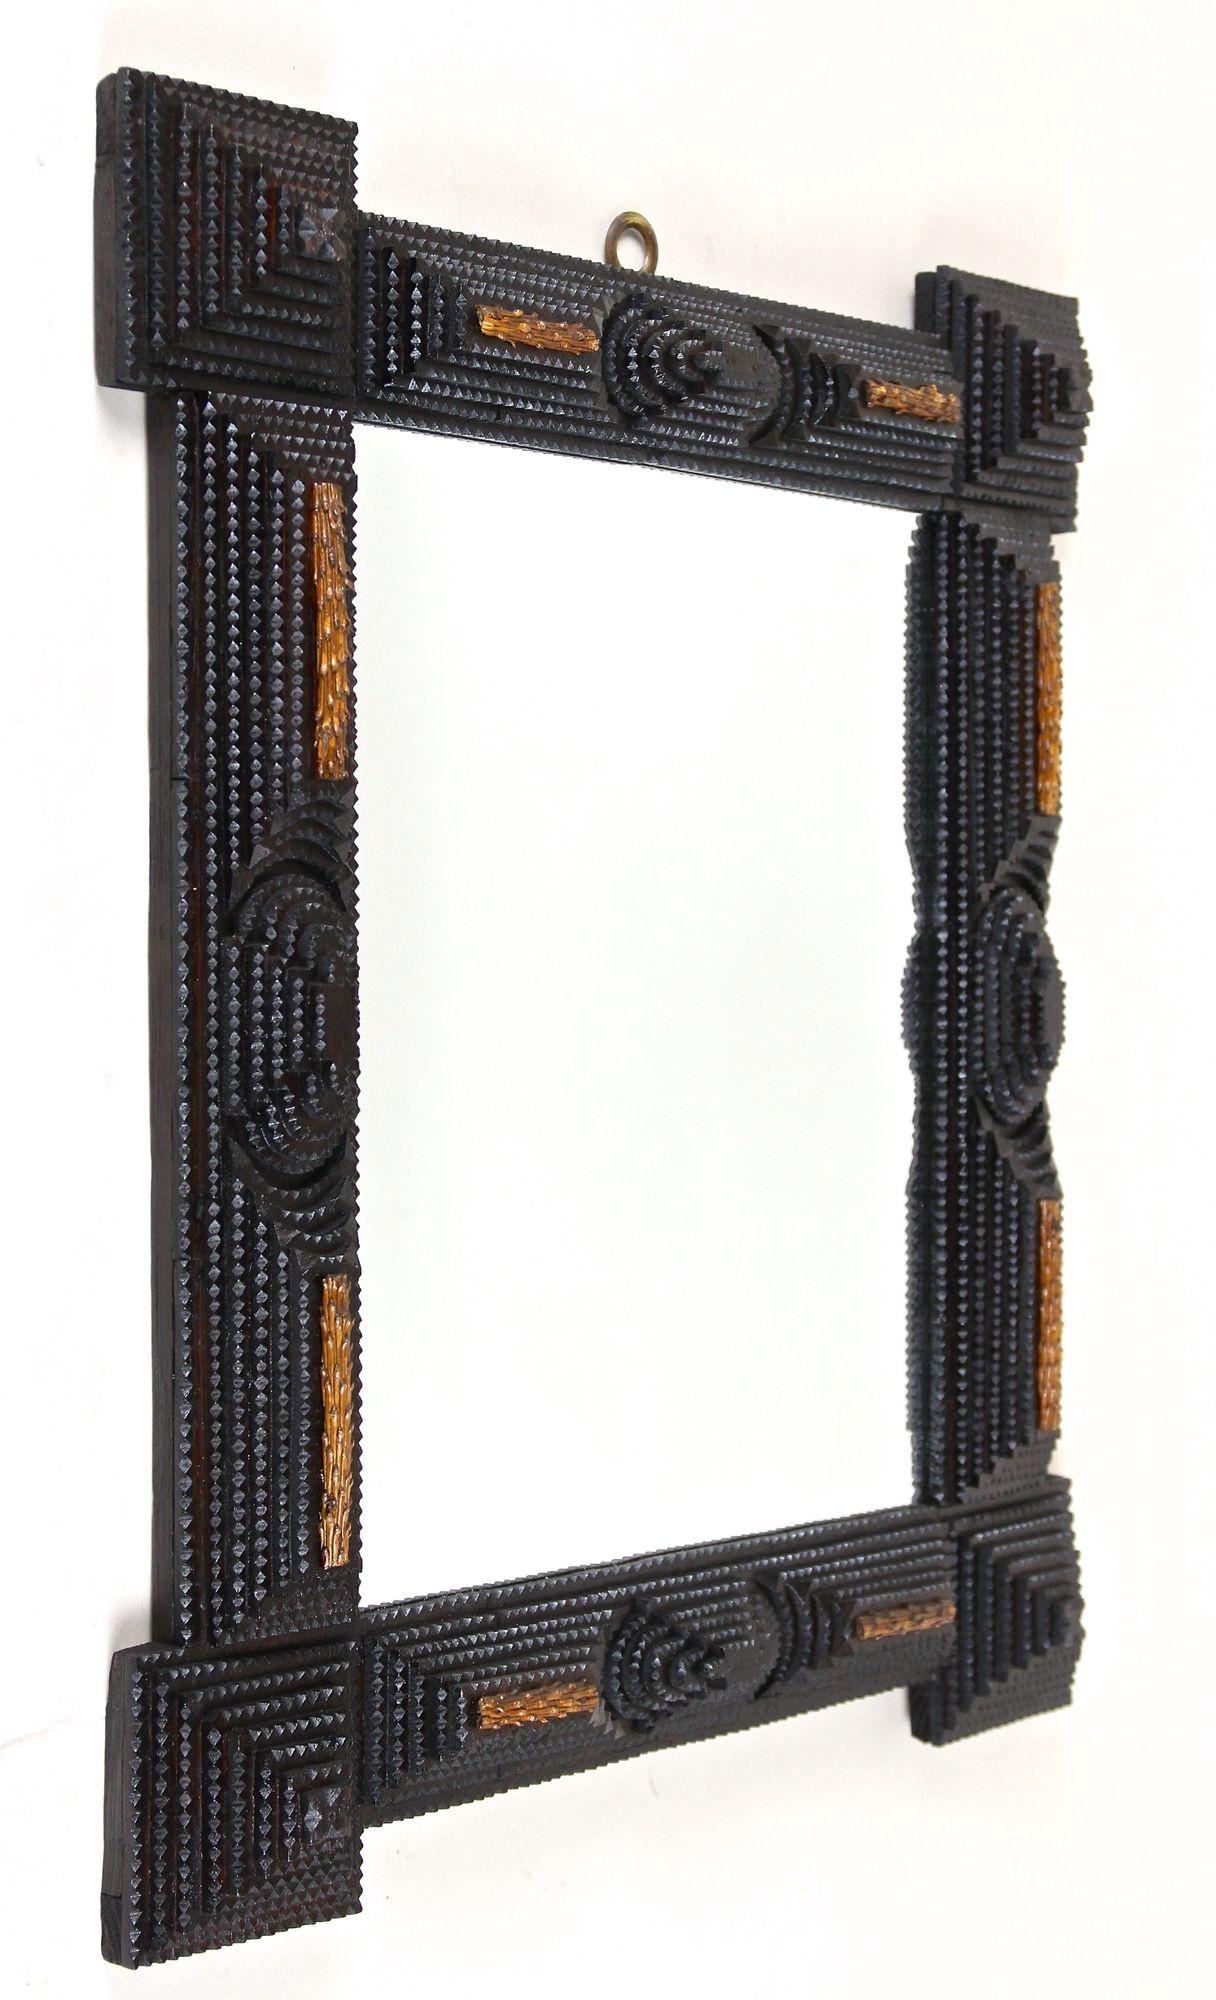 Extraordinary Tramp Art mirror from the late 19th century around 1890. Beautifully crafted out of hand carved basswood elements, this fantastic Tramp Art work out of Austria was done in the so called 